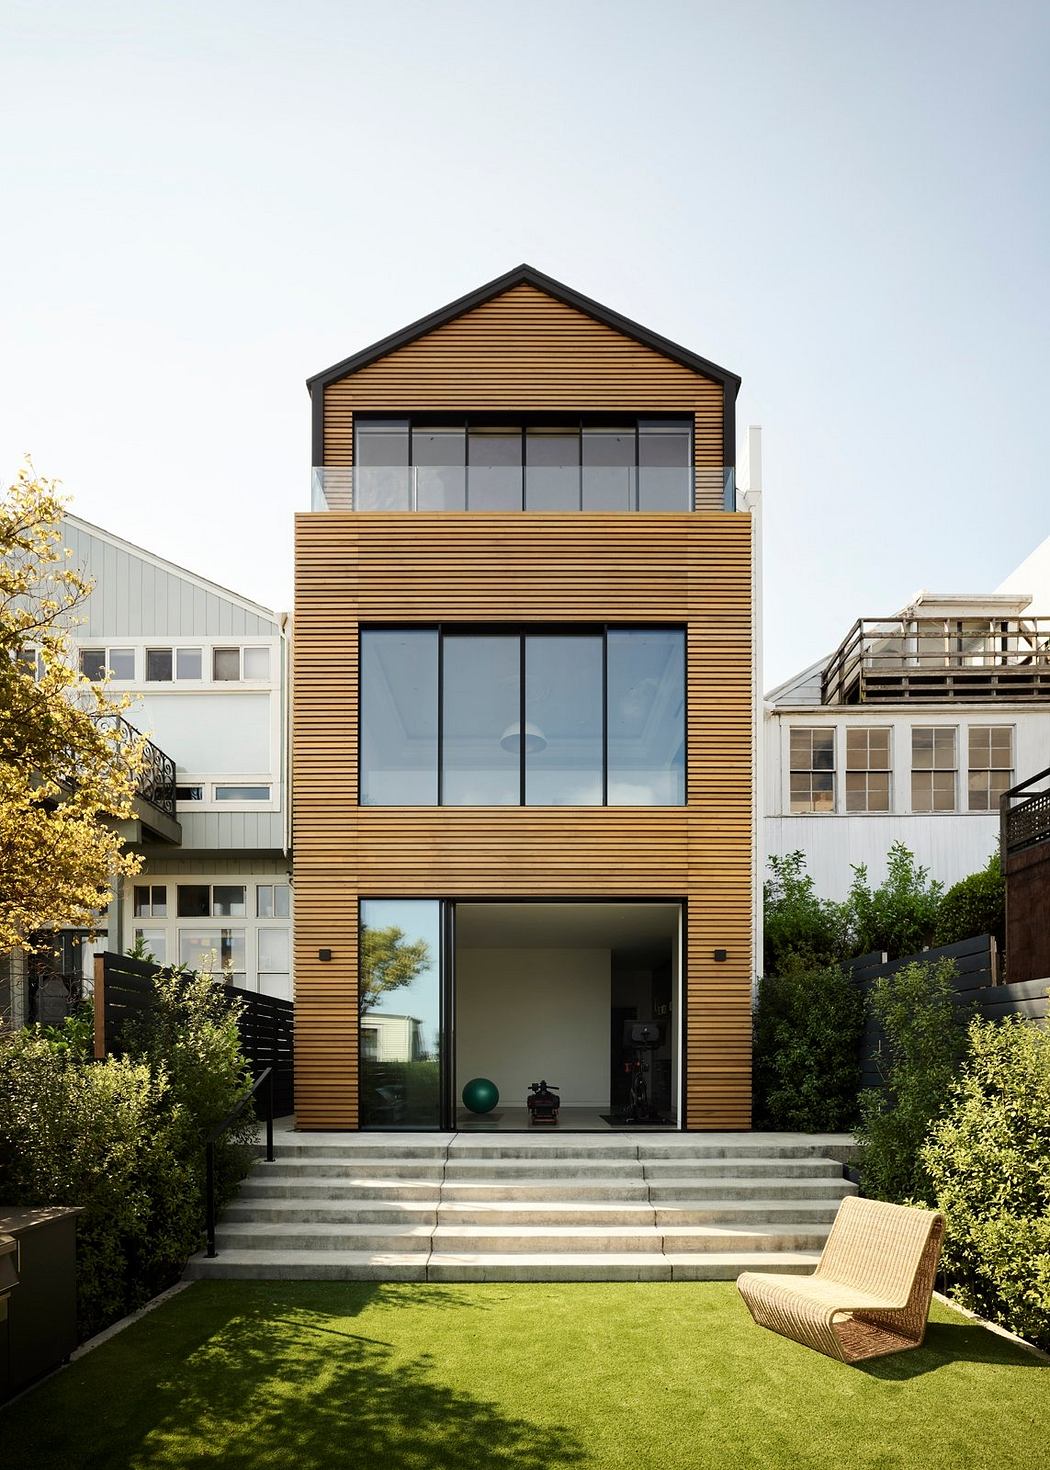 A modern, wood-clad house with large windows, a balcony, and a grassy yard.